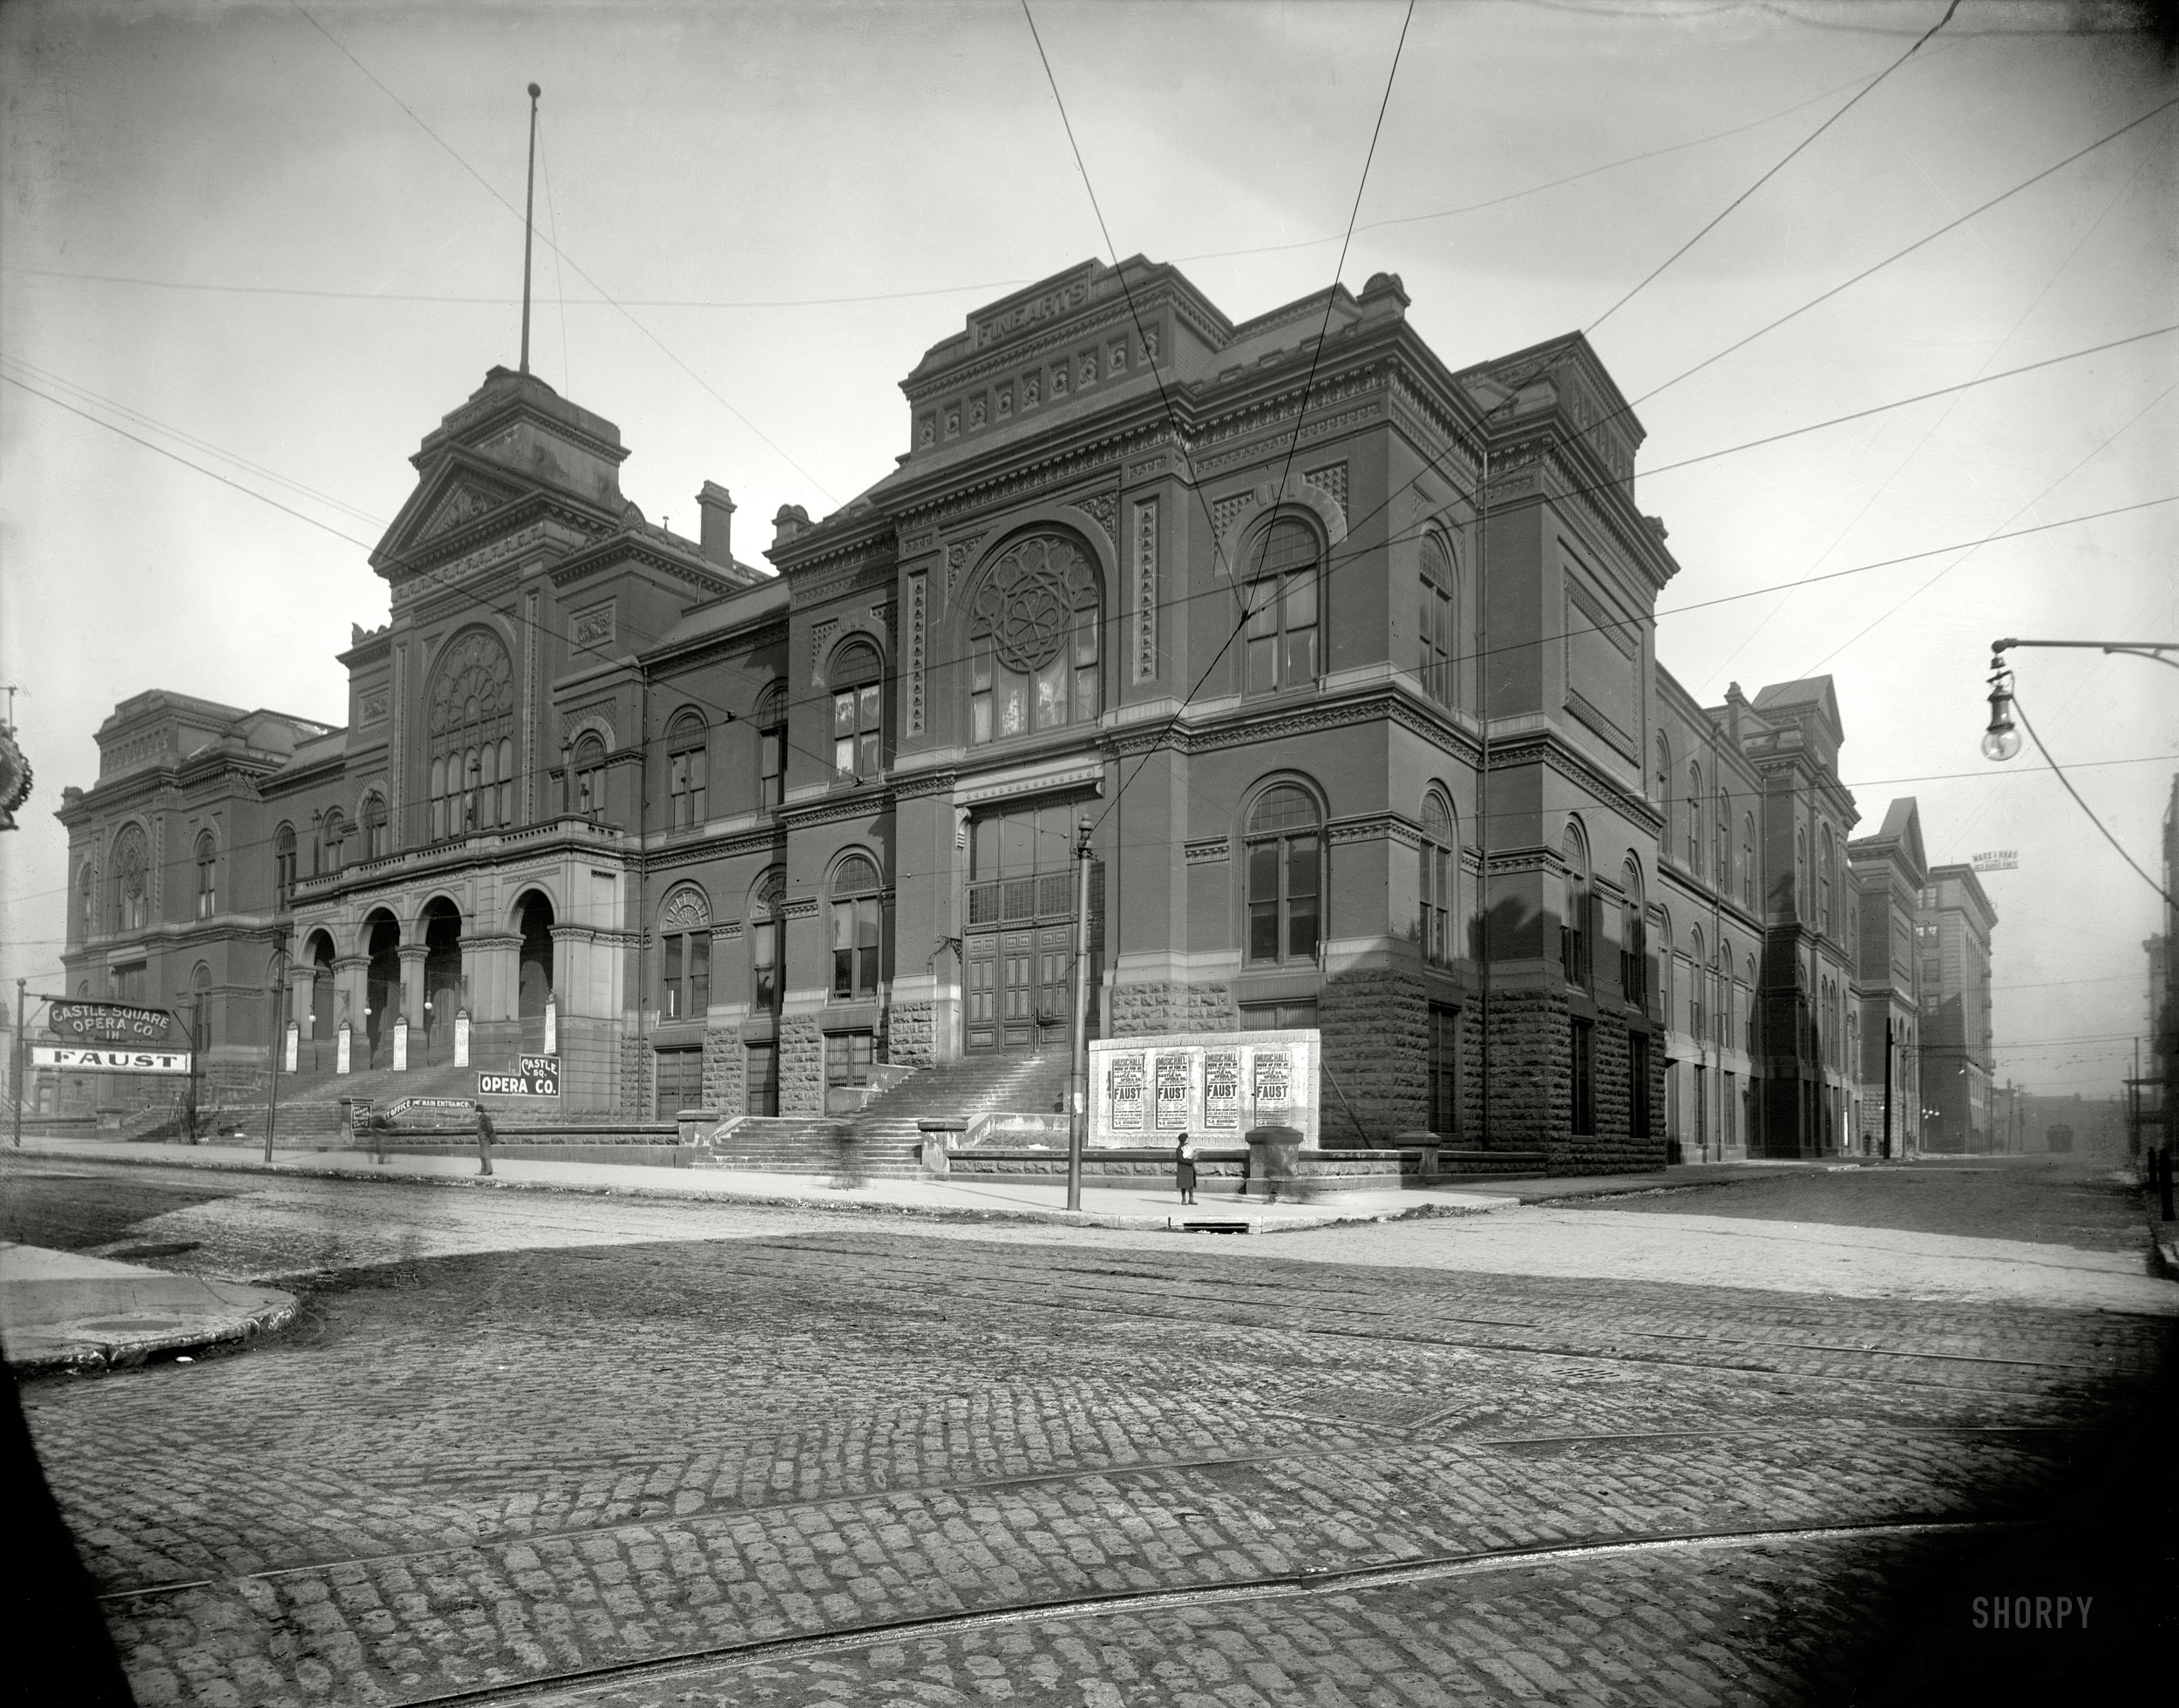 St. Louis, Missouri, circa 1906. "Exhibition Building." Where the Castle Square Opera's production of "Faust" looms large. 8x10 glass negative. View full size.